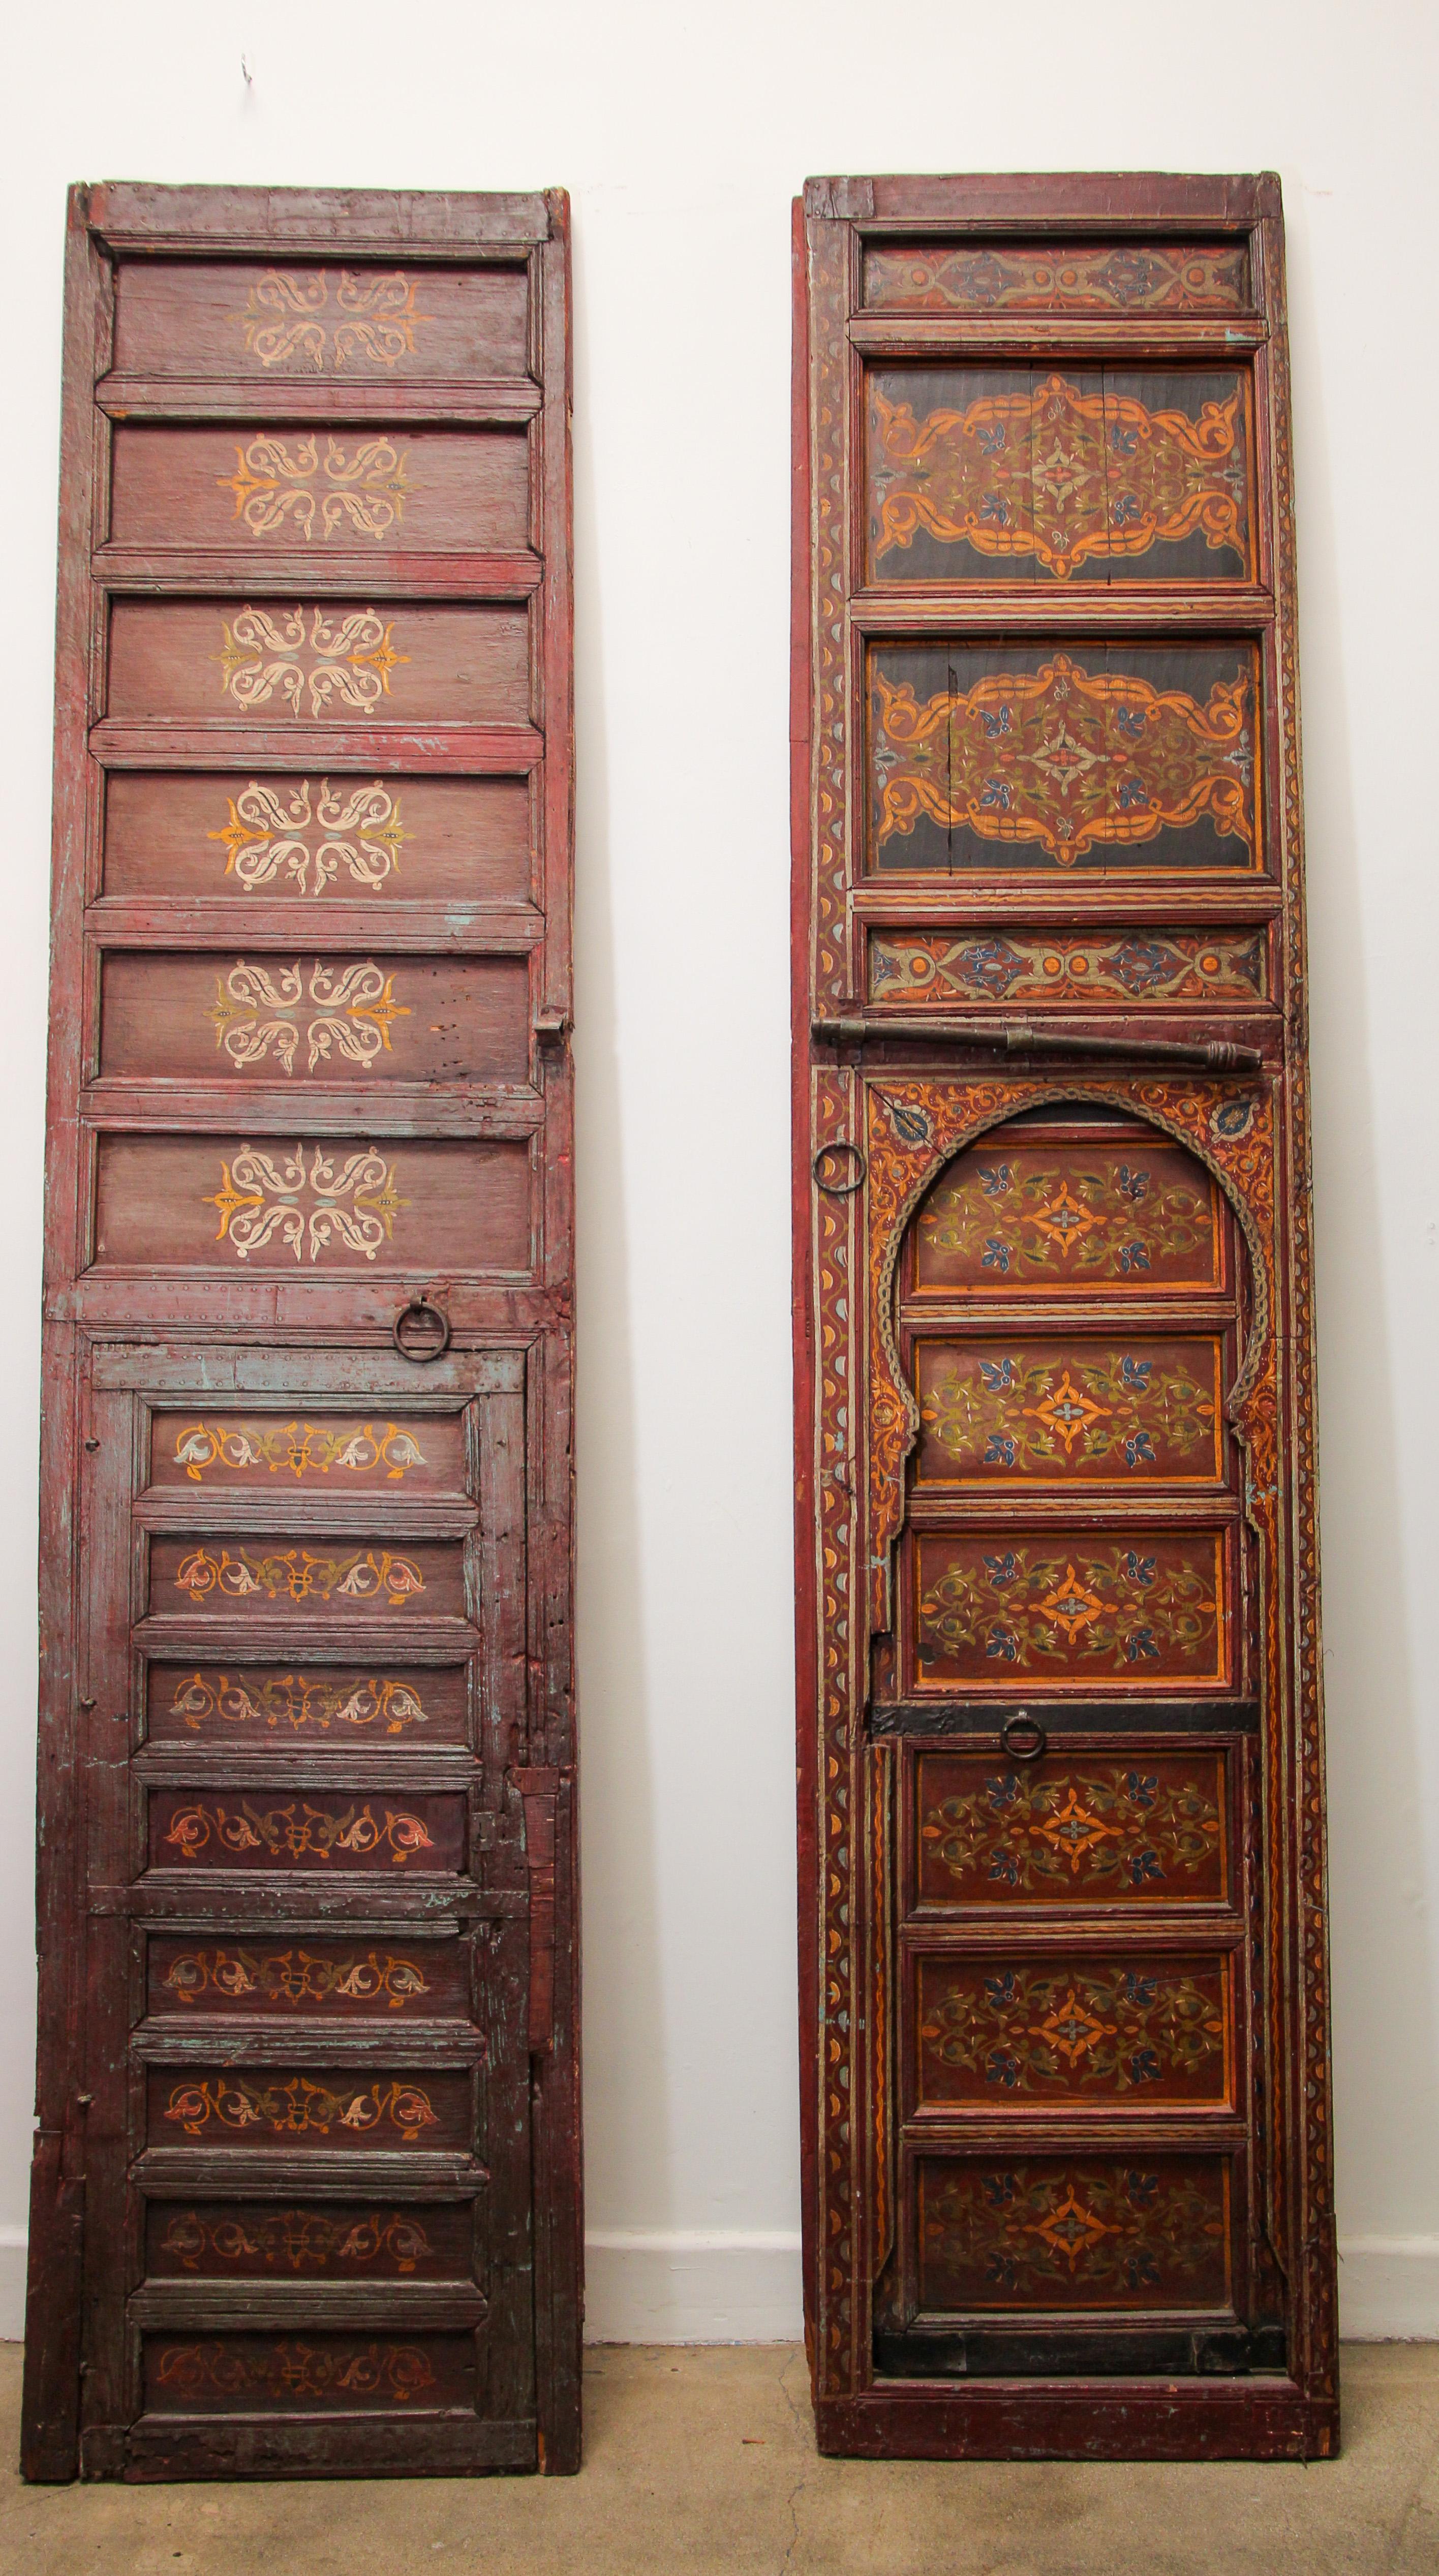 Moroccan huge antique doors from a Ryad in Fez, amazing hand painted artwork.
Multicolored geometrical Moorish designs in deep red, green, yellow.
Moroccan doors and furniture is most noted for the use of beautiful Moorish hand-painted and hand